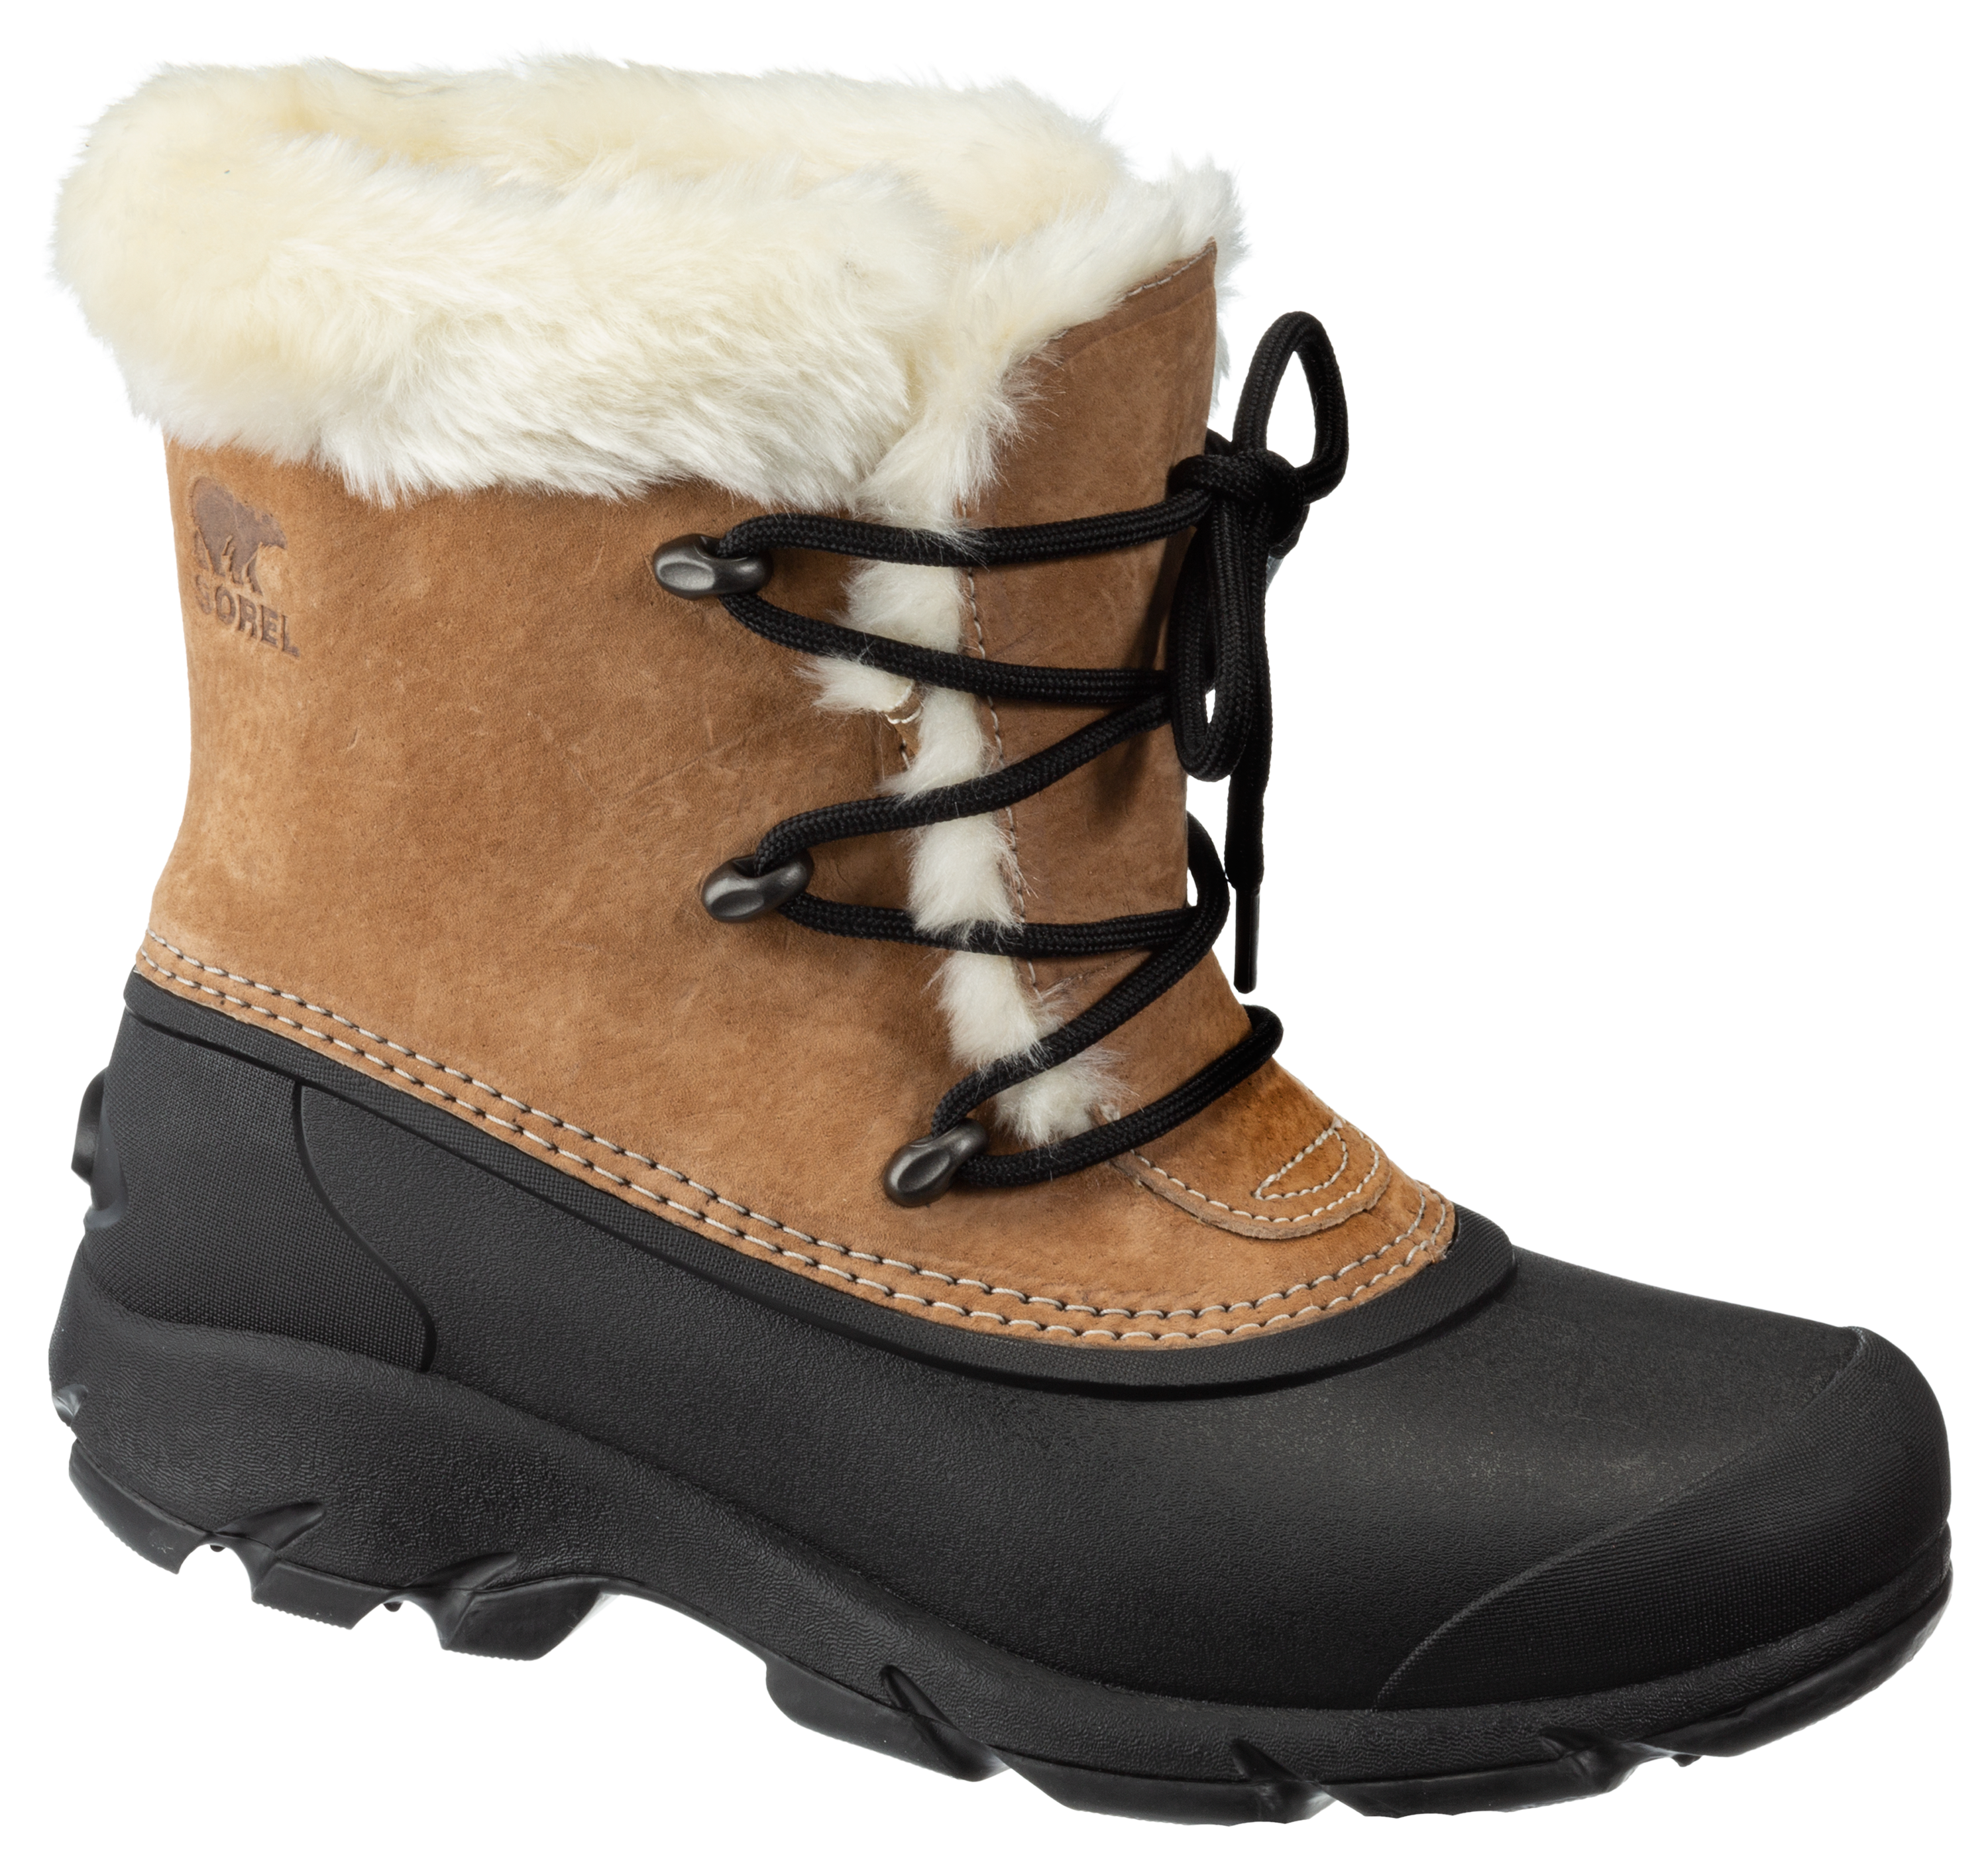 Sorel Snow Angel Insulated Pac Boots for Ladies | Bass Pro Shops